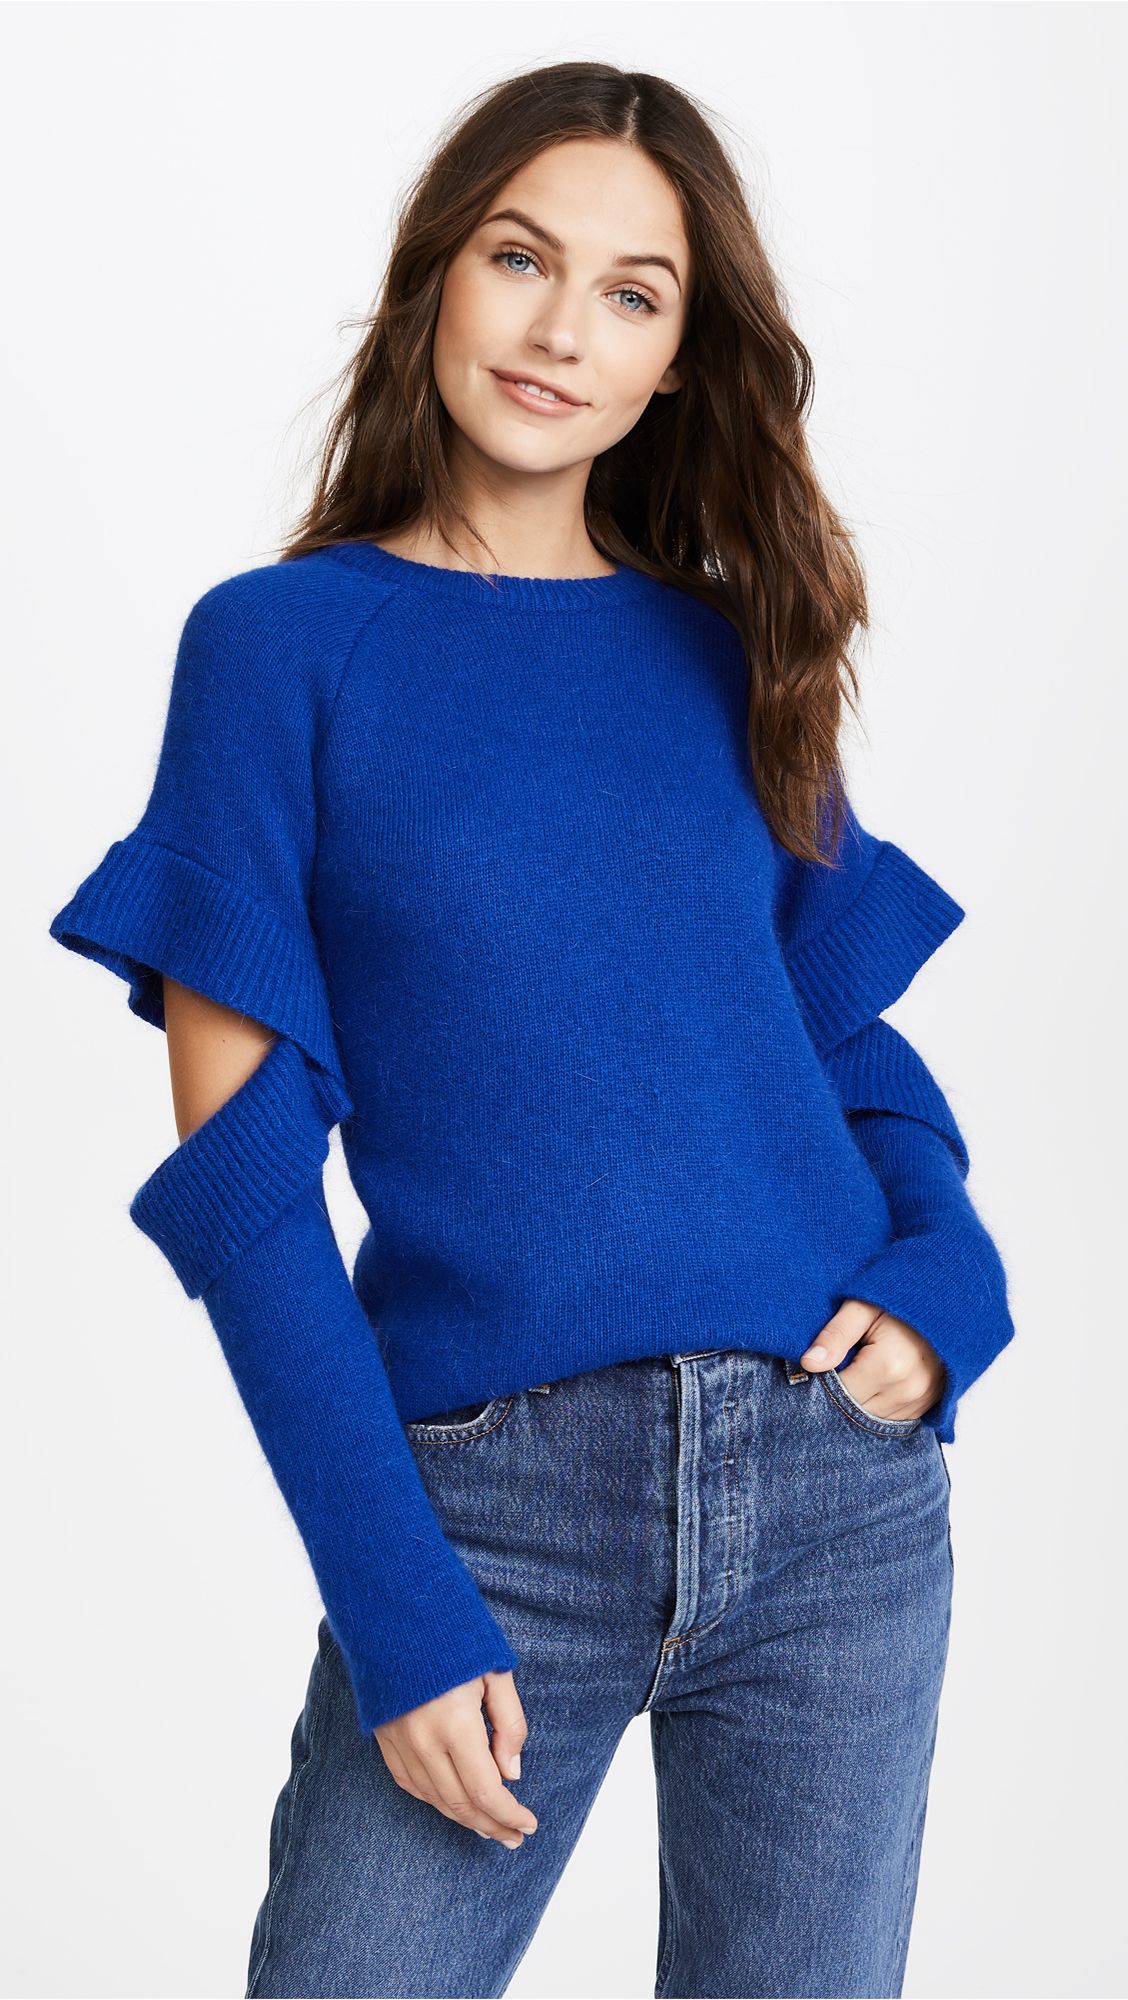 Sweater with Sleeve Ruffle Detail | Shopbop